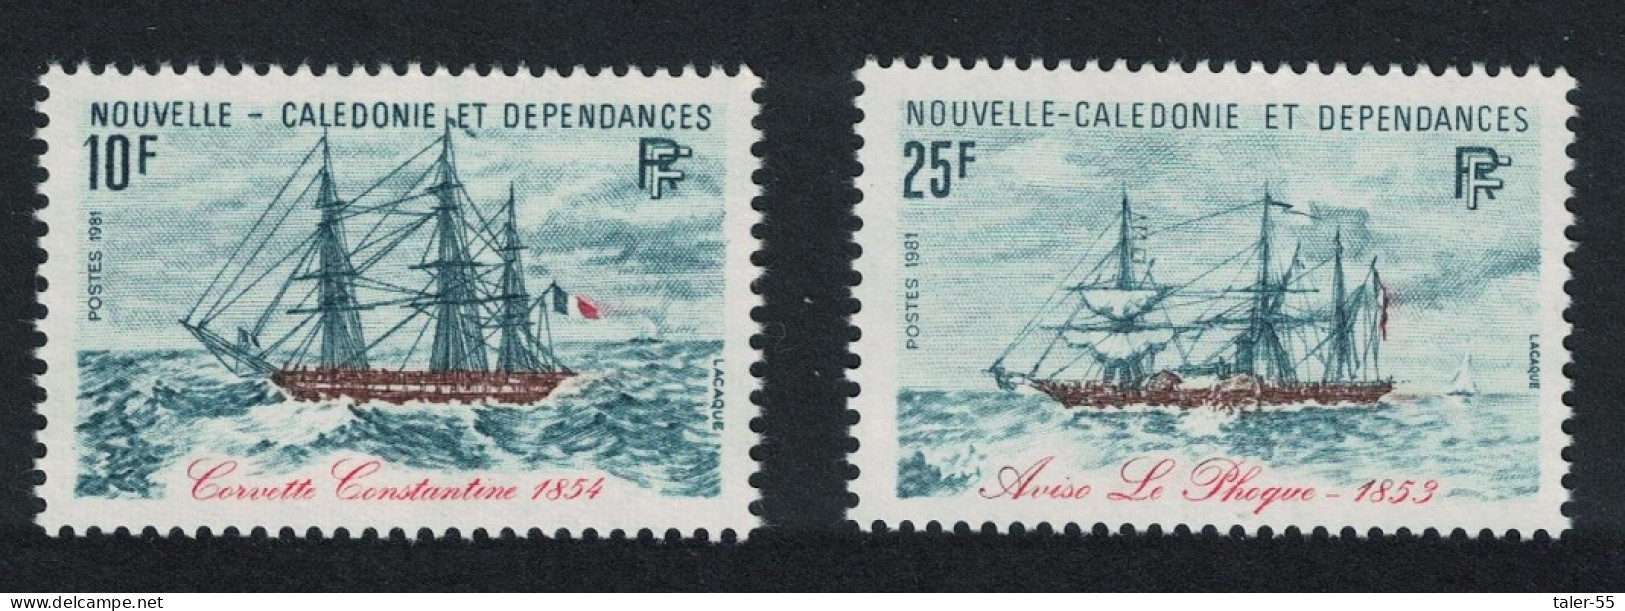 New Caledonia Ships Sail 'Corvette Constantine' Paddle-gunboat 1981 MNH SG#659-660 - Unused Stamps